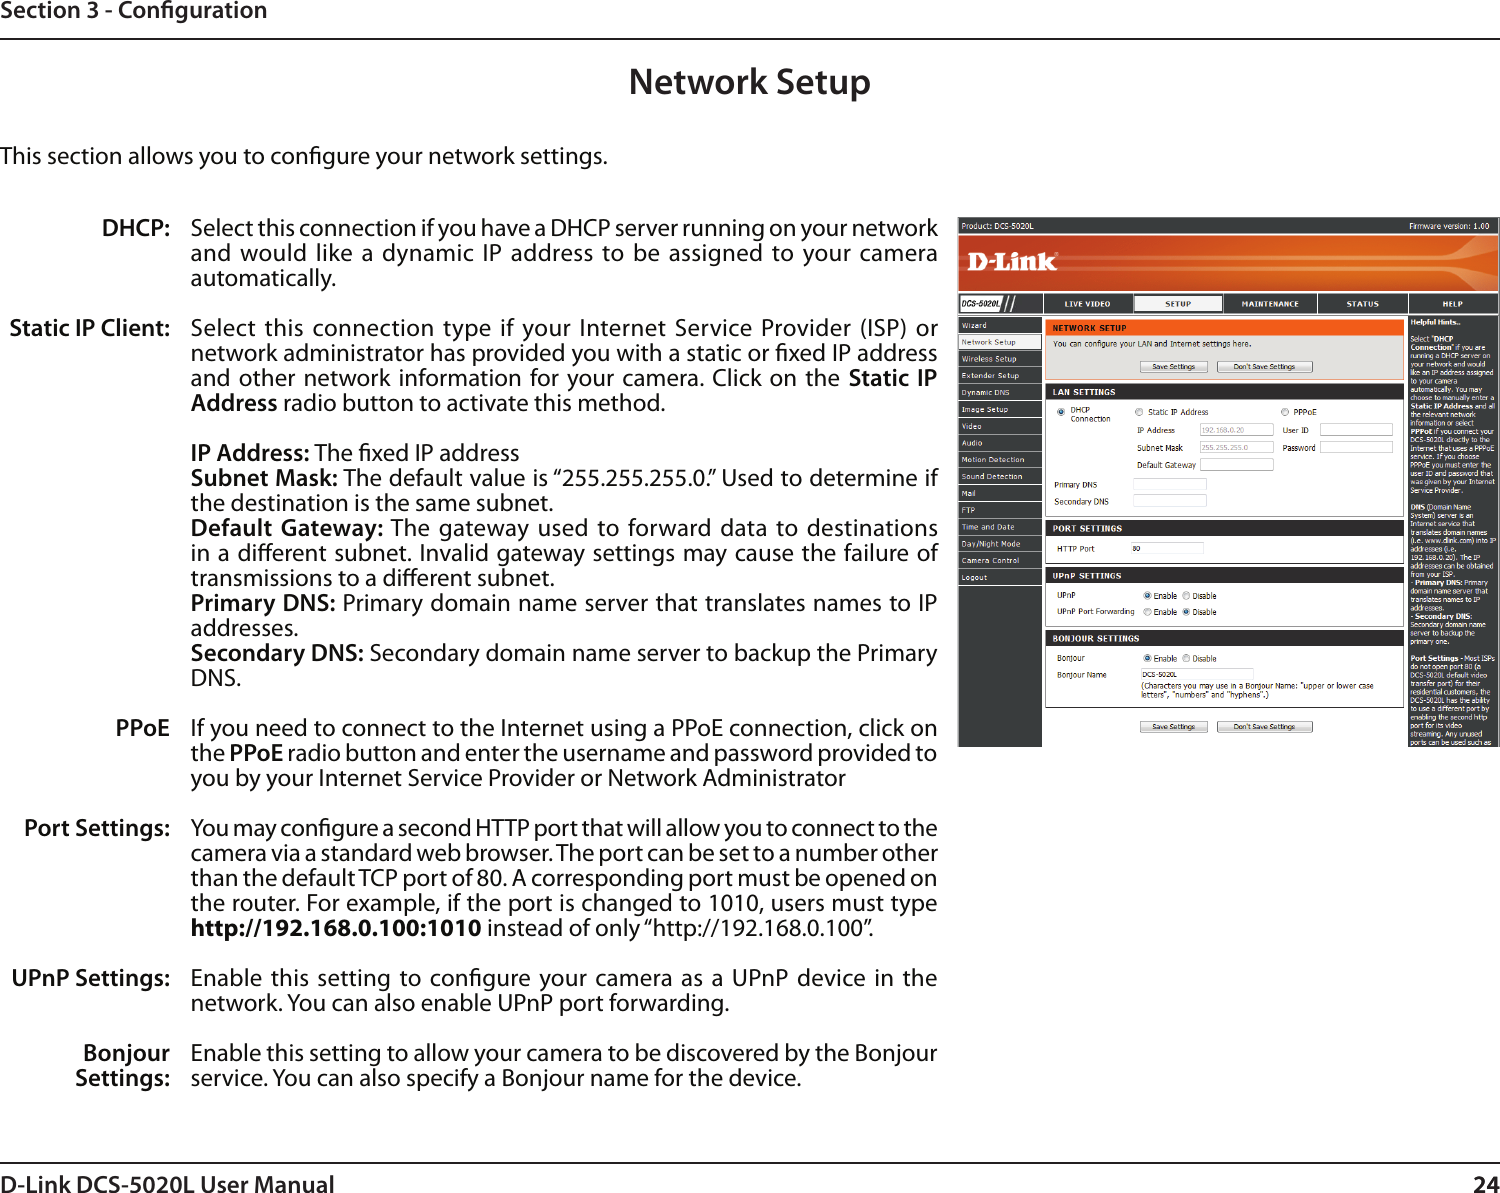 24D-Link DCS-5020L User Manual 24Section 3 - CongurationNetwork SetupSelect this connection if you have a DHCP server running on your network and would like  a dynamic  IP address to be assigned  to your camera automatically. Select  this connection type if your Internet Service  Provider (ISP) or network administrator has provided you with a static or xed IP address and other network information for your  camera. Click on  the  Static  IP Address radio button to activate this method.IP Address: The xed IP addressSubnet Mask: The default value is “255.255.255.0.” Used to determine if the destination is the same subnet.Default  Gateway: The gateway used  to forward data to destinations in a dierent subnet. Invalid gateway settings may cause the failure of transmissions to a dierent subnet.Primary DNS: Primary domain name server that translates names to IP addresses.Secondary DNS: Secondary domain name server to backup the Primary DNS.If you need to connect to the Internet using a PPoE connection, click on the PPoE radio button and enter the username and password provided to you by your Internet Service Provider or Network AdministratorYou may congure a second HTTP port that will allow you to connect to the camera via a standard web browser. The port can be set to a number other than the default TCP port of 80. A corresponding port must be opened on the router. For example, if the port is changed to 1010, users must type http://192.168.0.100:1010 instead of only “http://192.168.0.100”. Enable this  setting to congure your camera as a  UPnP device in  the network. You can also enable UPnP port forwarding. Enable this setting to allow your camera to be discovered by the Bonjour service. You can also specify a Bonjour name for the device.DHCP:Static IP Client:PPoEPort Settings:UPnP Settings:Bonjour Settings:This section allows you to congure your network settings.